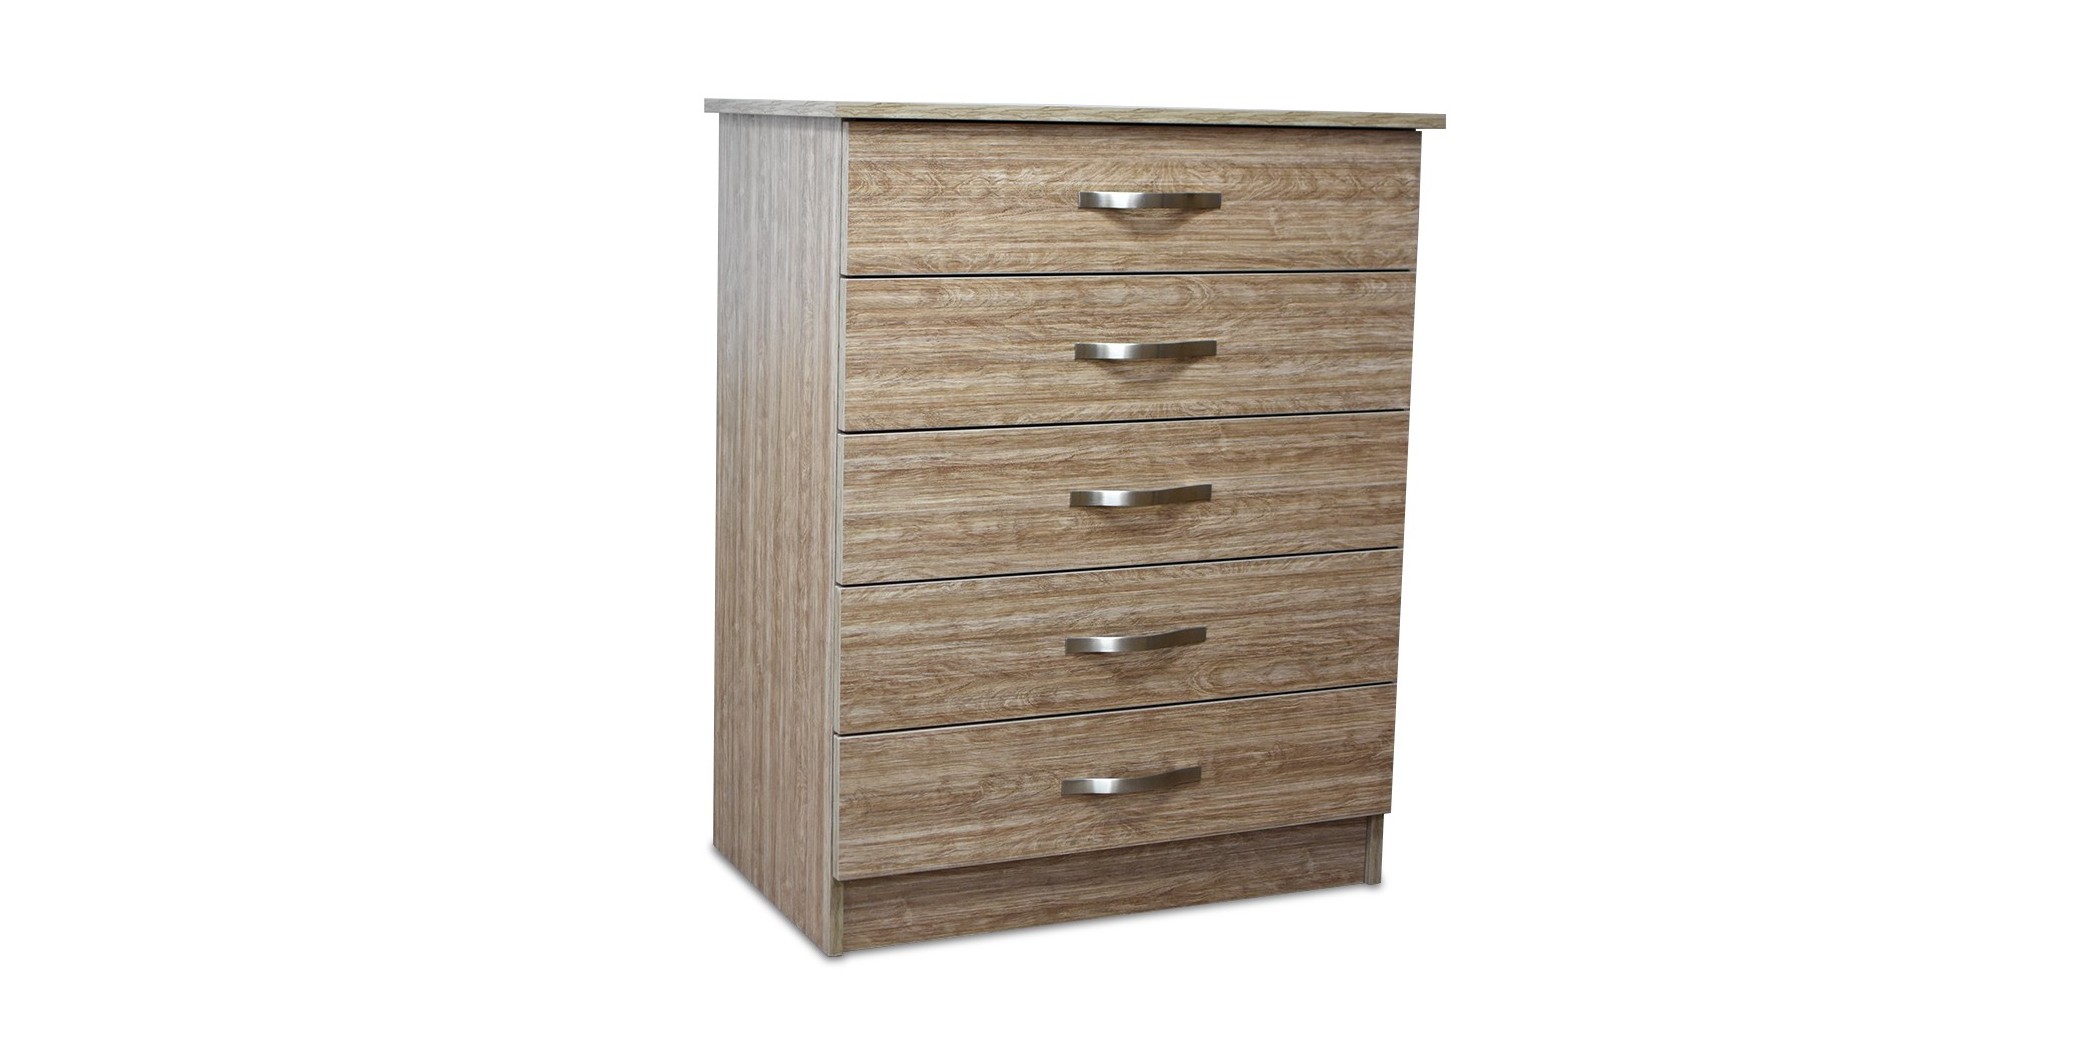 Vanitio Chest of 5 Drawers Brown Wood MDF